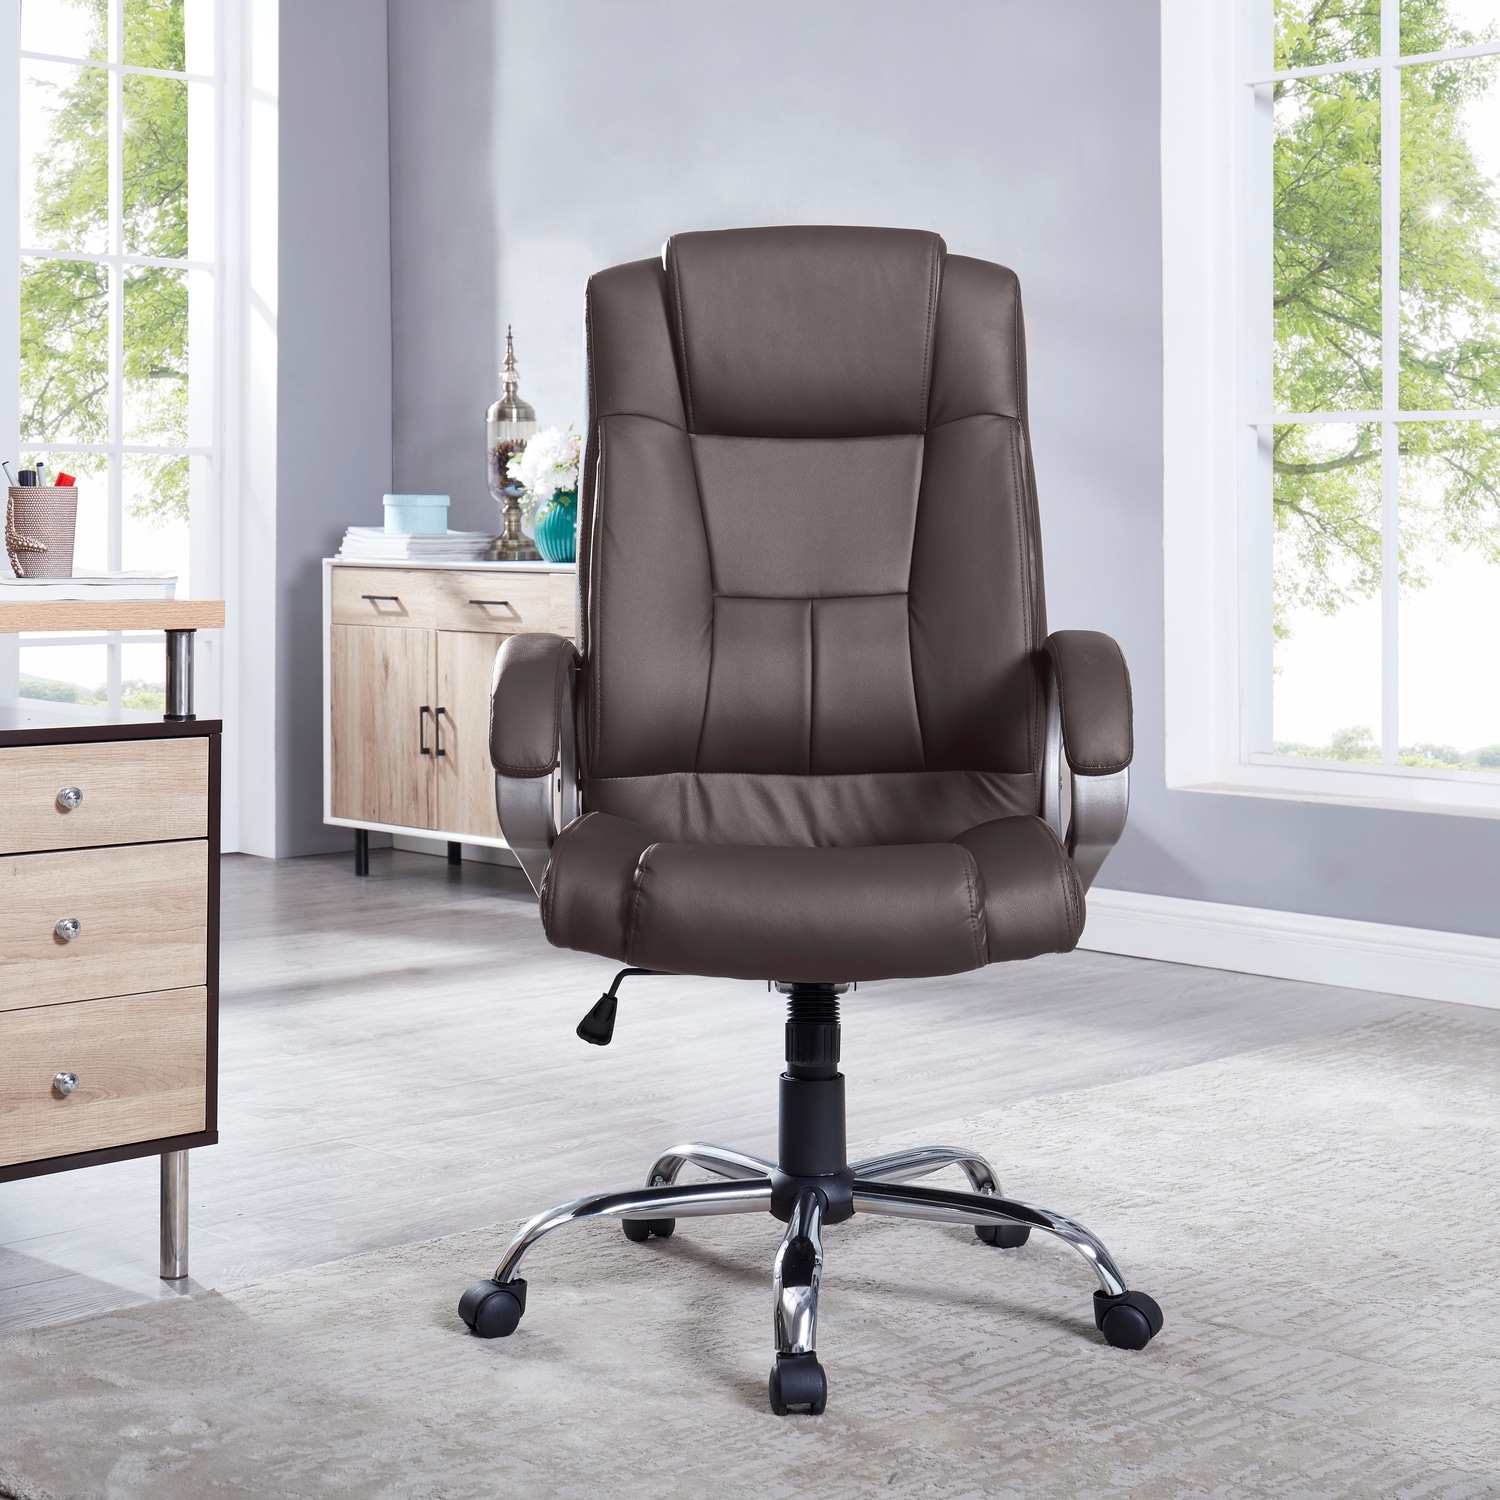 https://ak1.ostkcdn.com/images/products/is/images/direct/6bf5300cbee0fc9d7e4aa9182e178ef4517446c5/Halle-Executive-Office-Chair-High-Back-Executive-Desk-Chair-with-Armrests-Lumbar-Support%2C-360-Degree-Swivel-Leather-Office-Chair.jpg